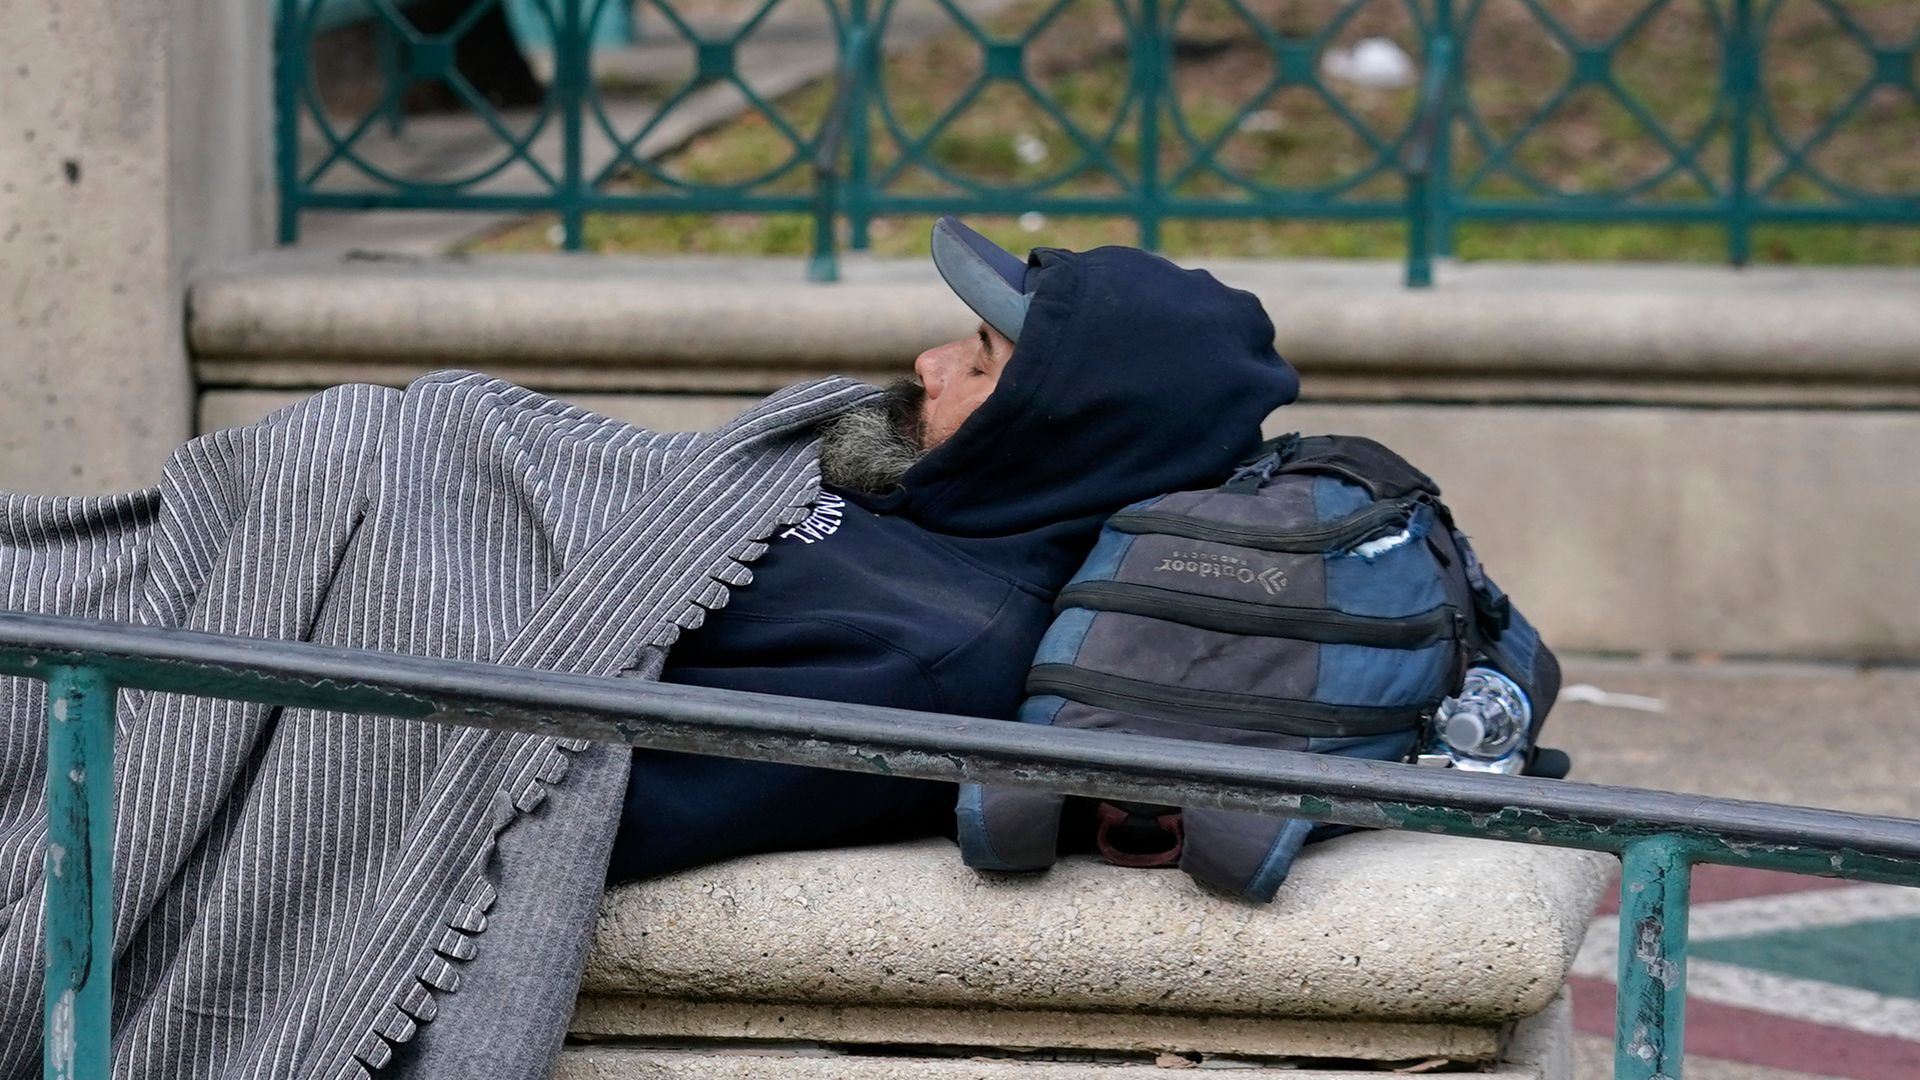 New legislation signed into law by Gov. Ron DeSantis, R-Fla., will ban people experiencing homelessness from sleeping in public places.